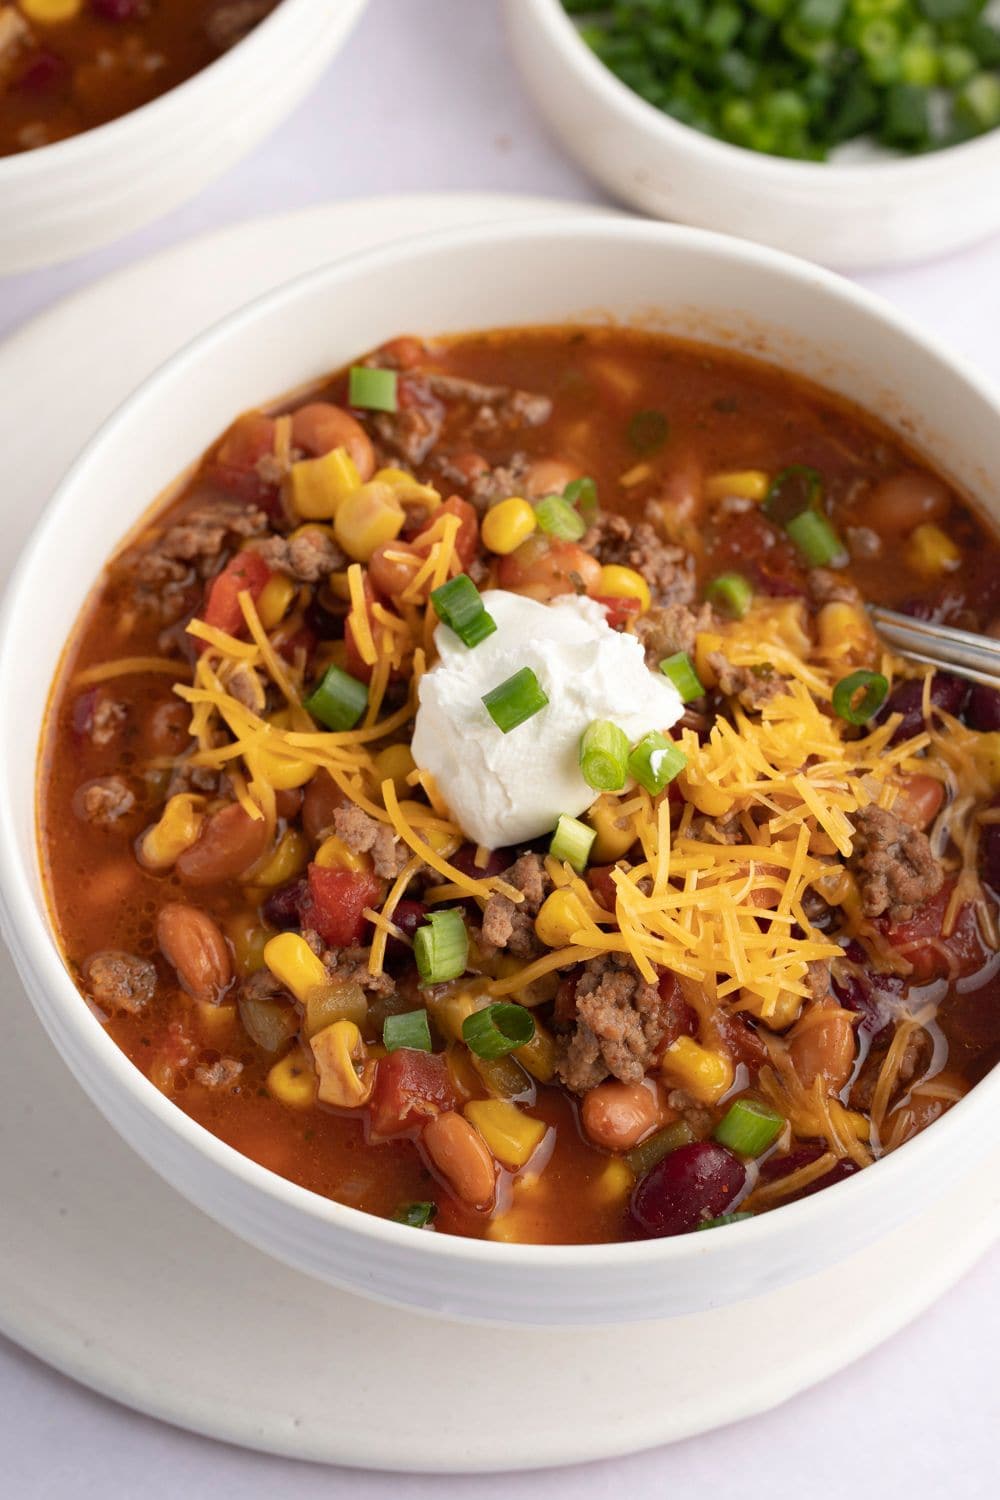 Warm of Bowl of Crockpot Taco Soup with Beans, Cheese, and Sour Cream